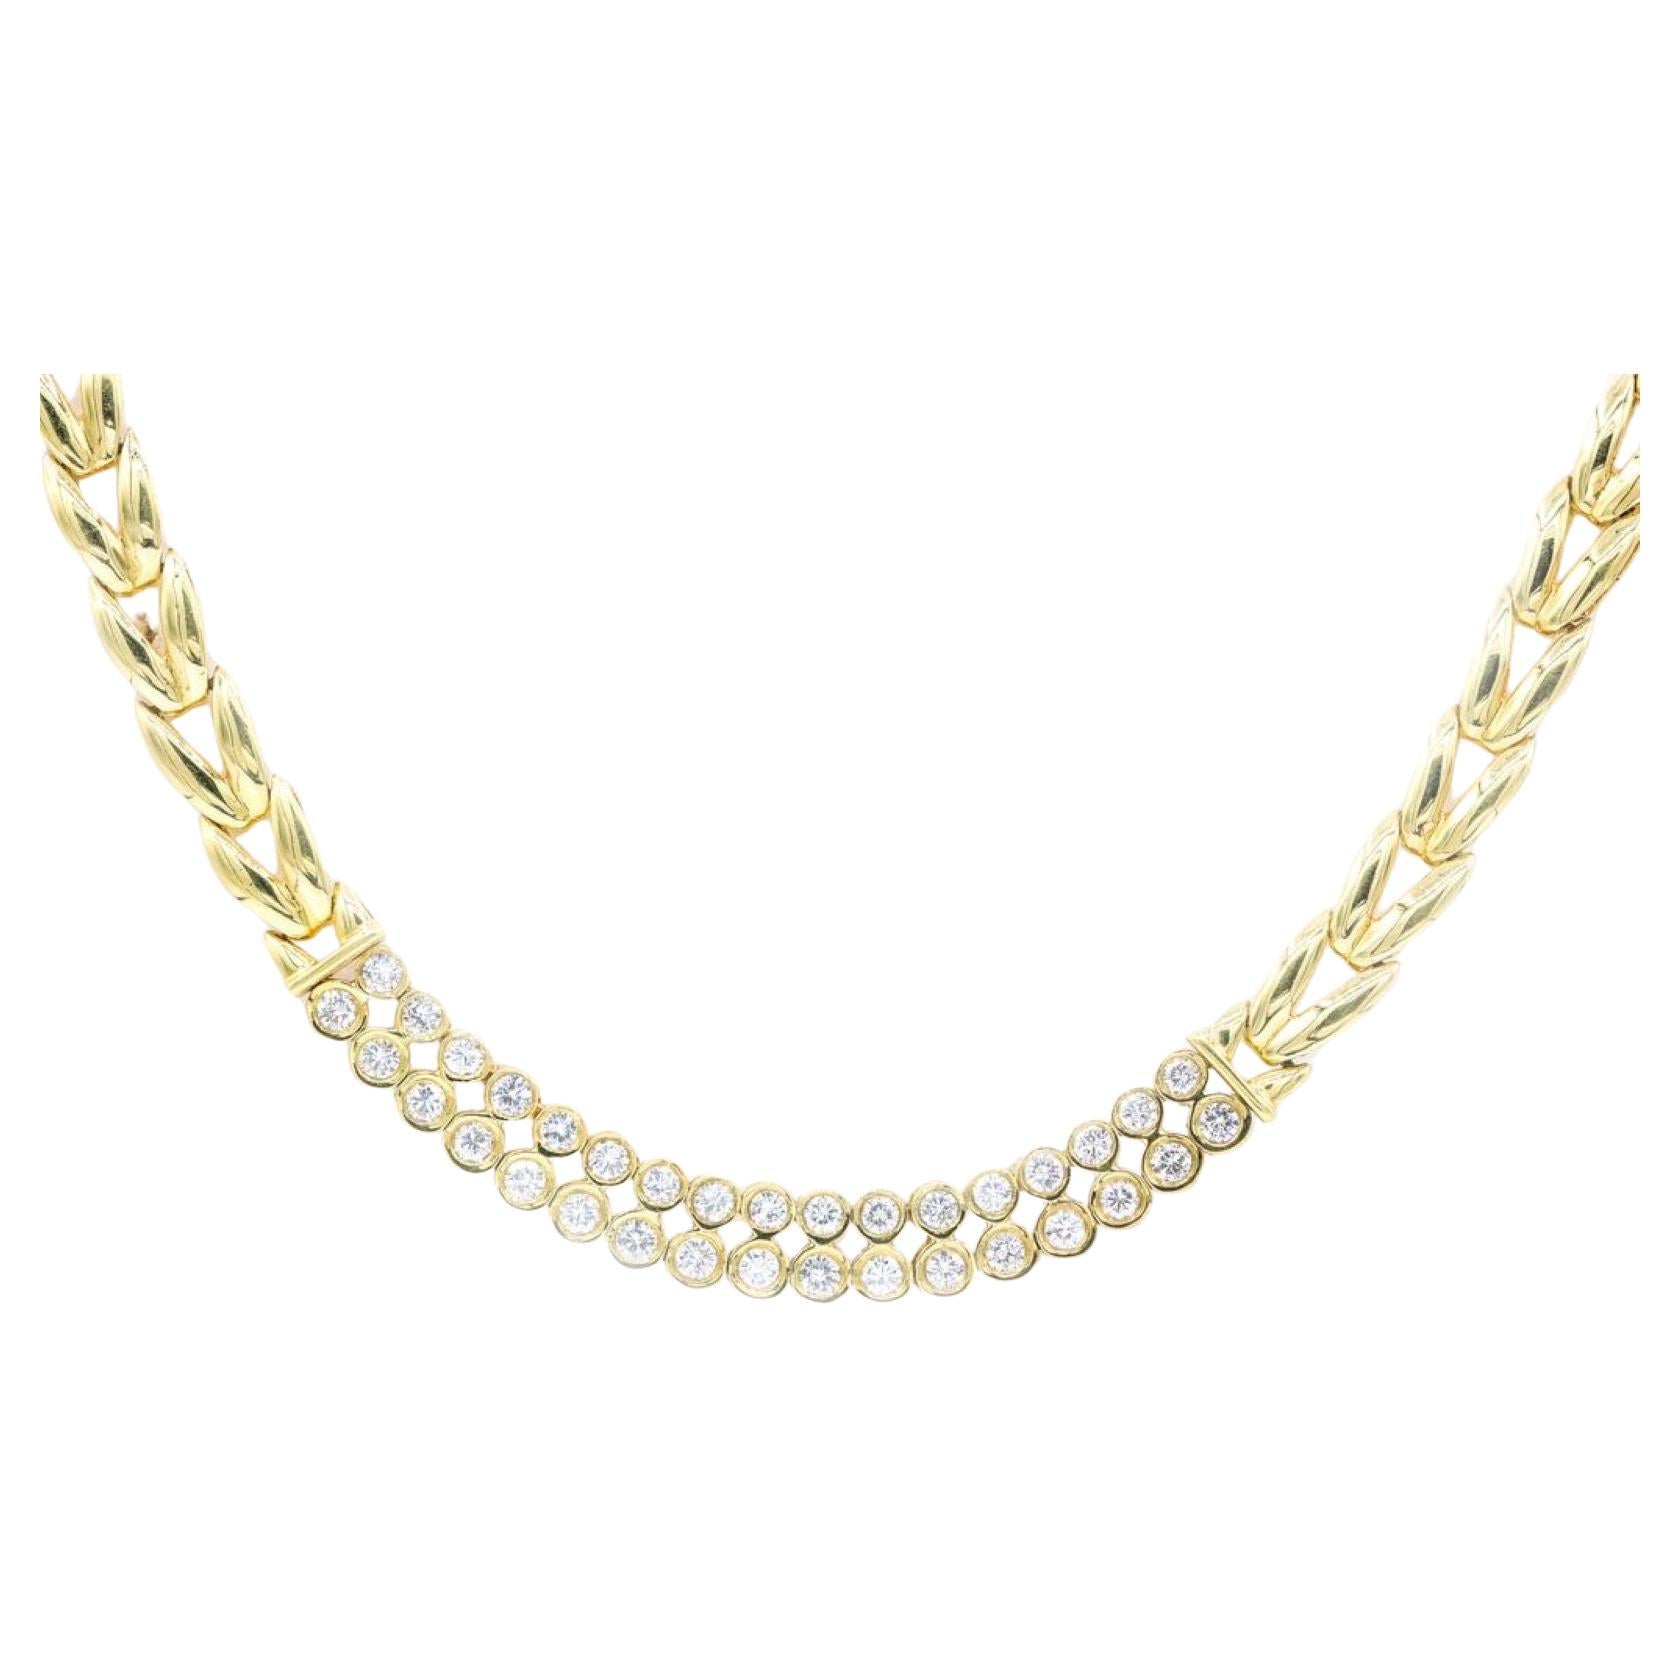 Diana M 2.05cts Diamond Choker Necklace in 14kt Yellow Gold